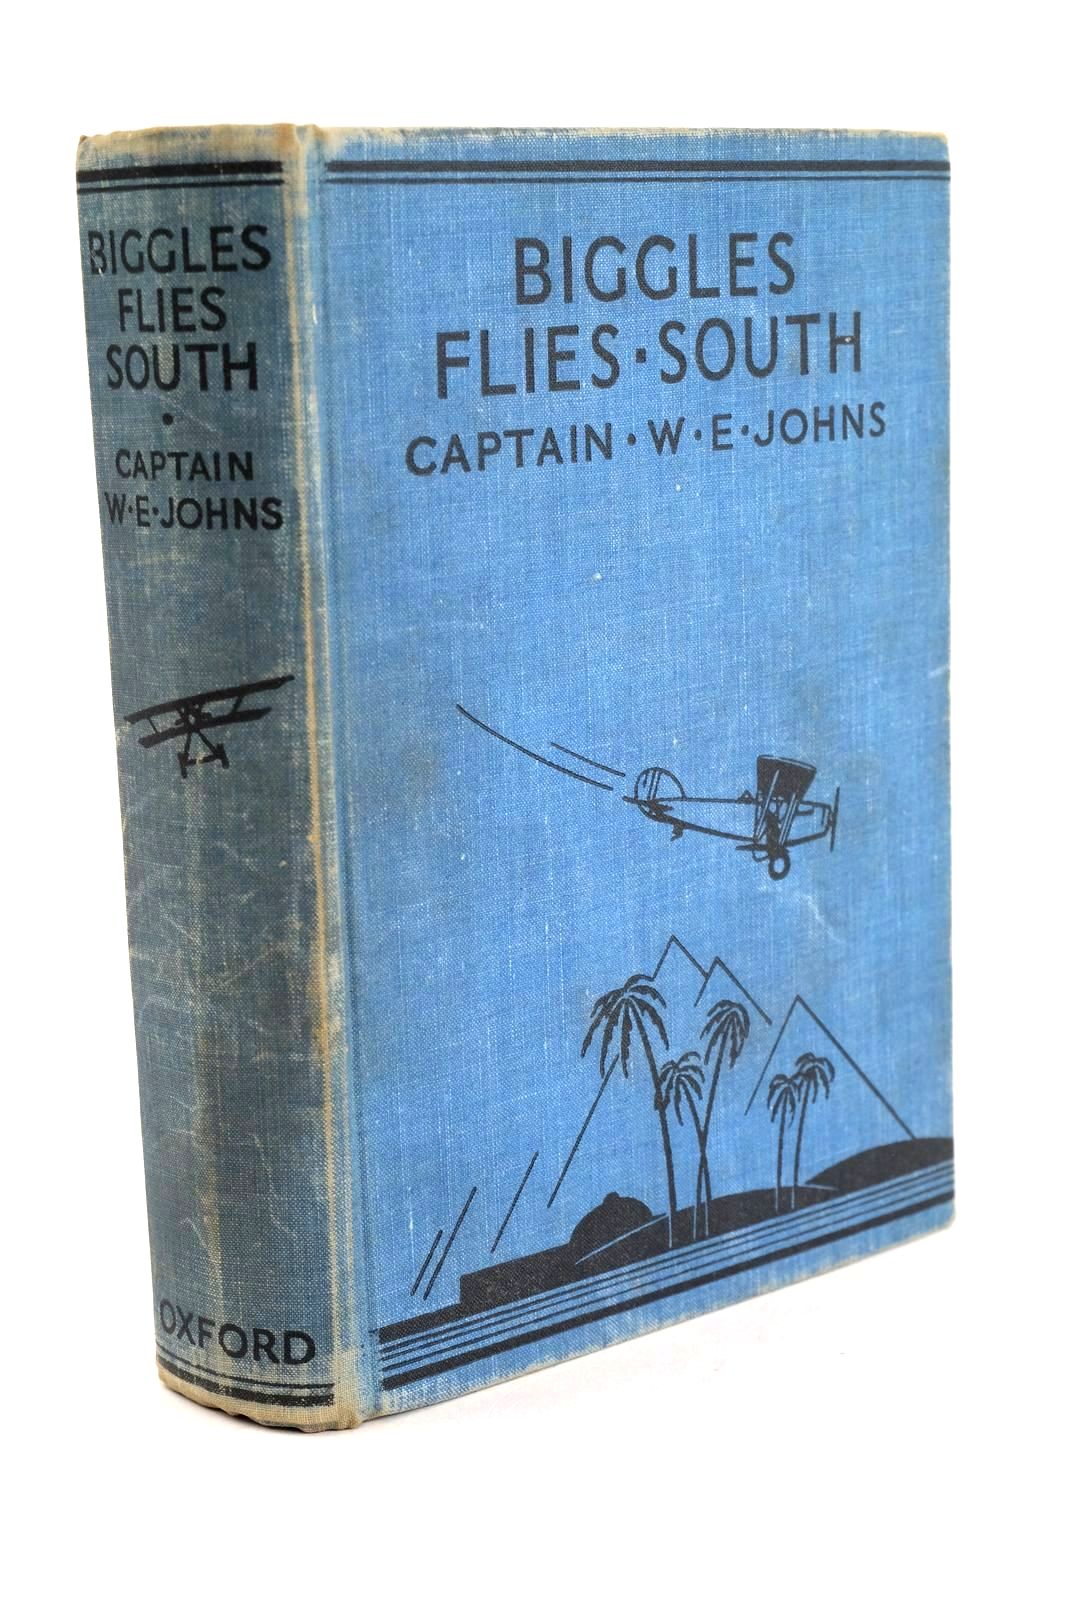 Photo of BIGGLES FLIES SOUTH- Stock Number: 1324101